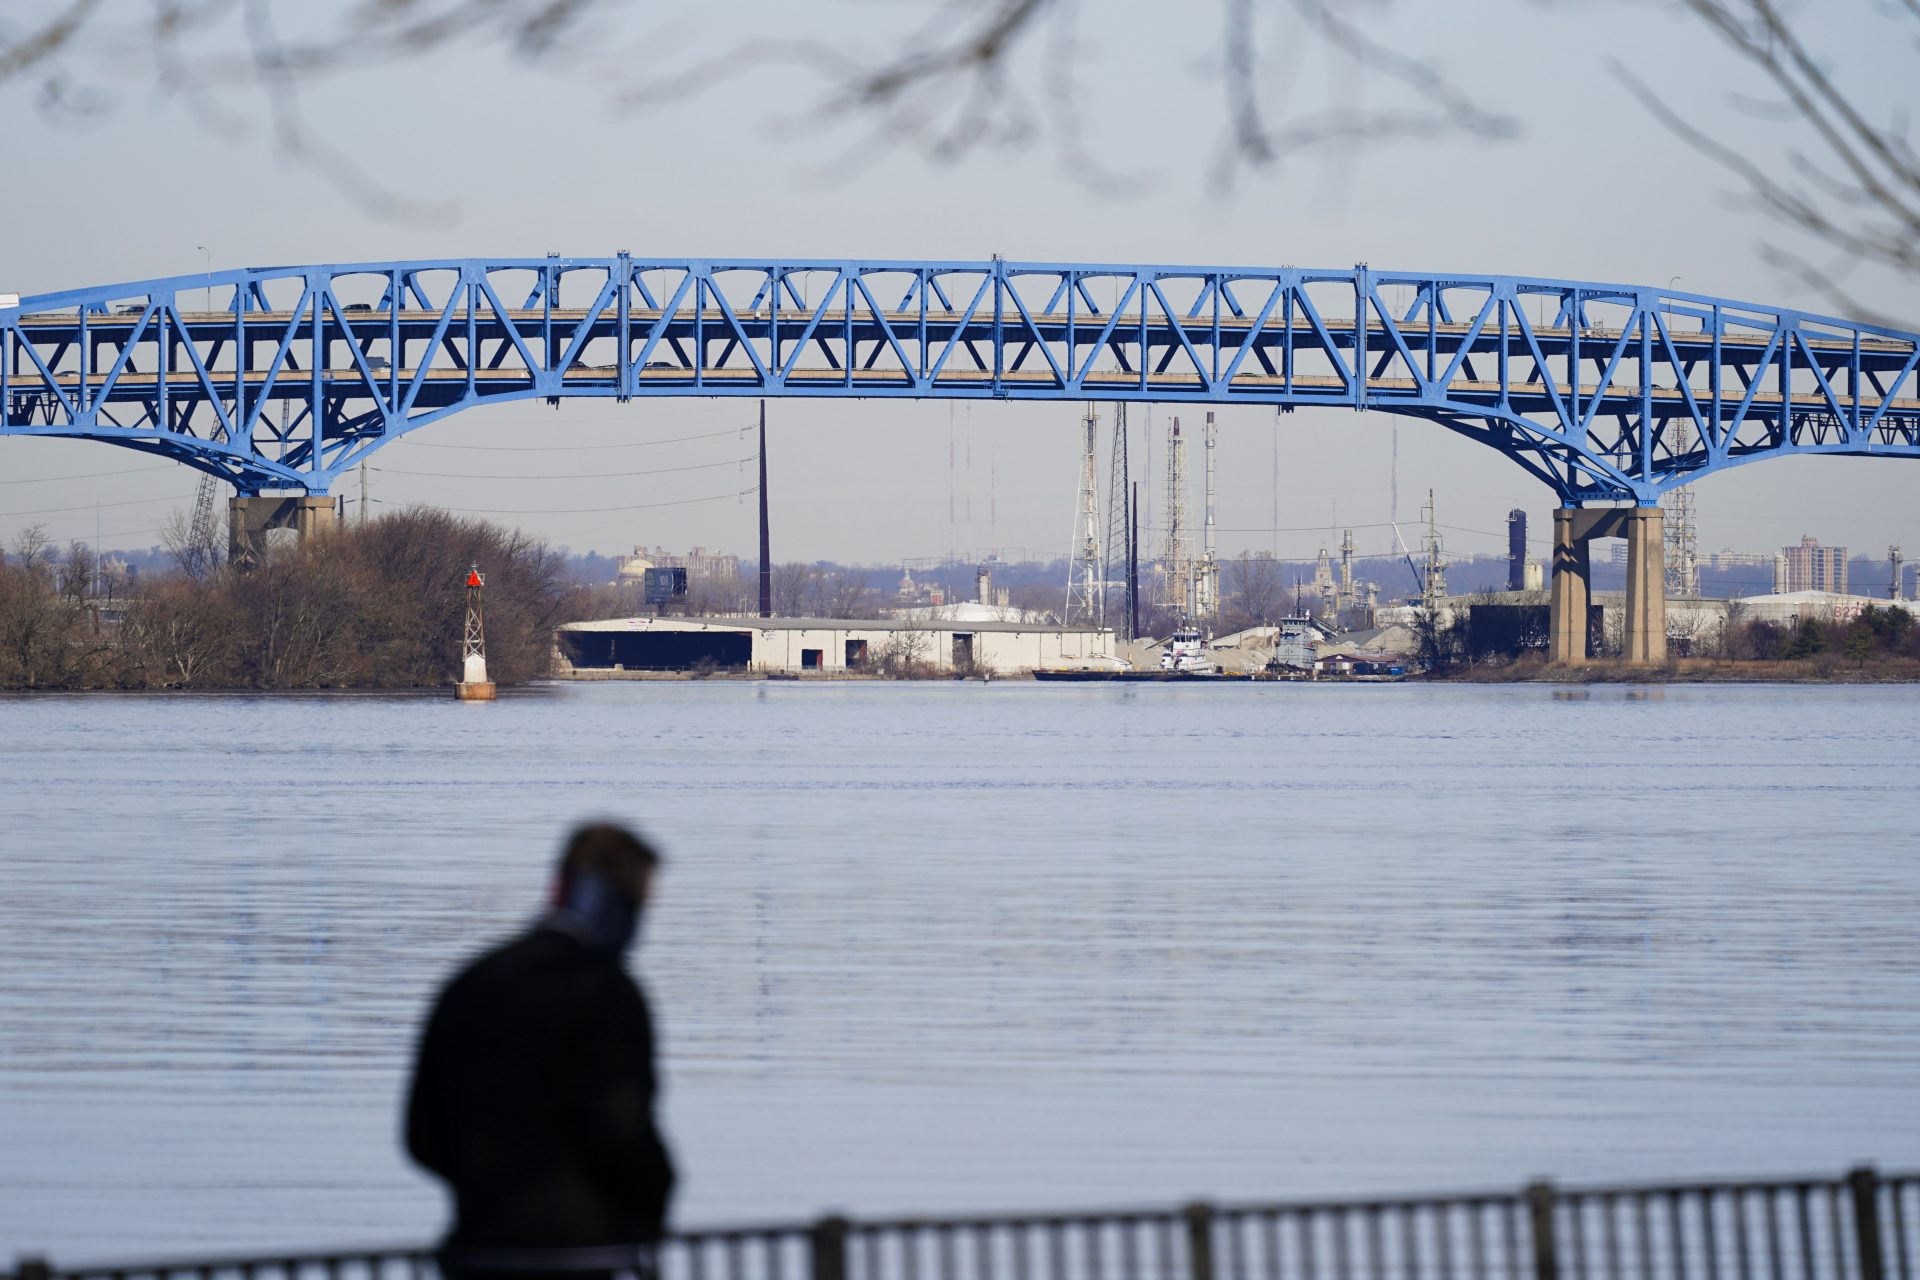 A person walks past the Interstate-95′s mile-long double-decked Girard Point Bridge in Philadelphia, Wednesday, Feb. 24, 2021. PennDOT named several bridges including the Girard Point Bridge that it said it is considering tolling to pay for the reconstruction.